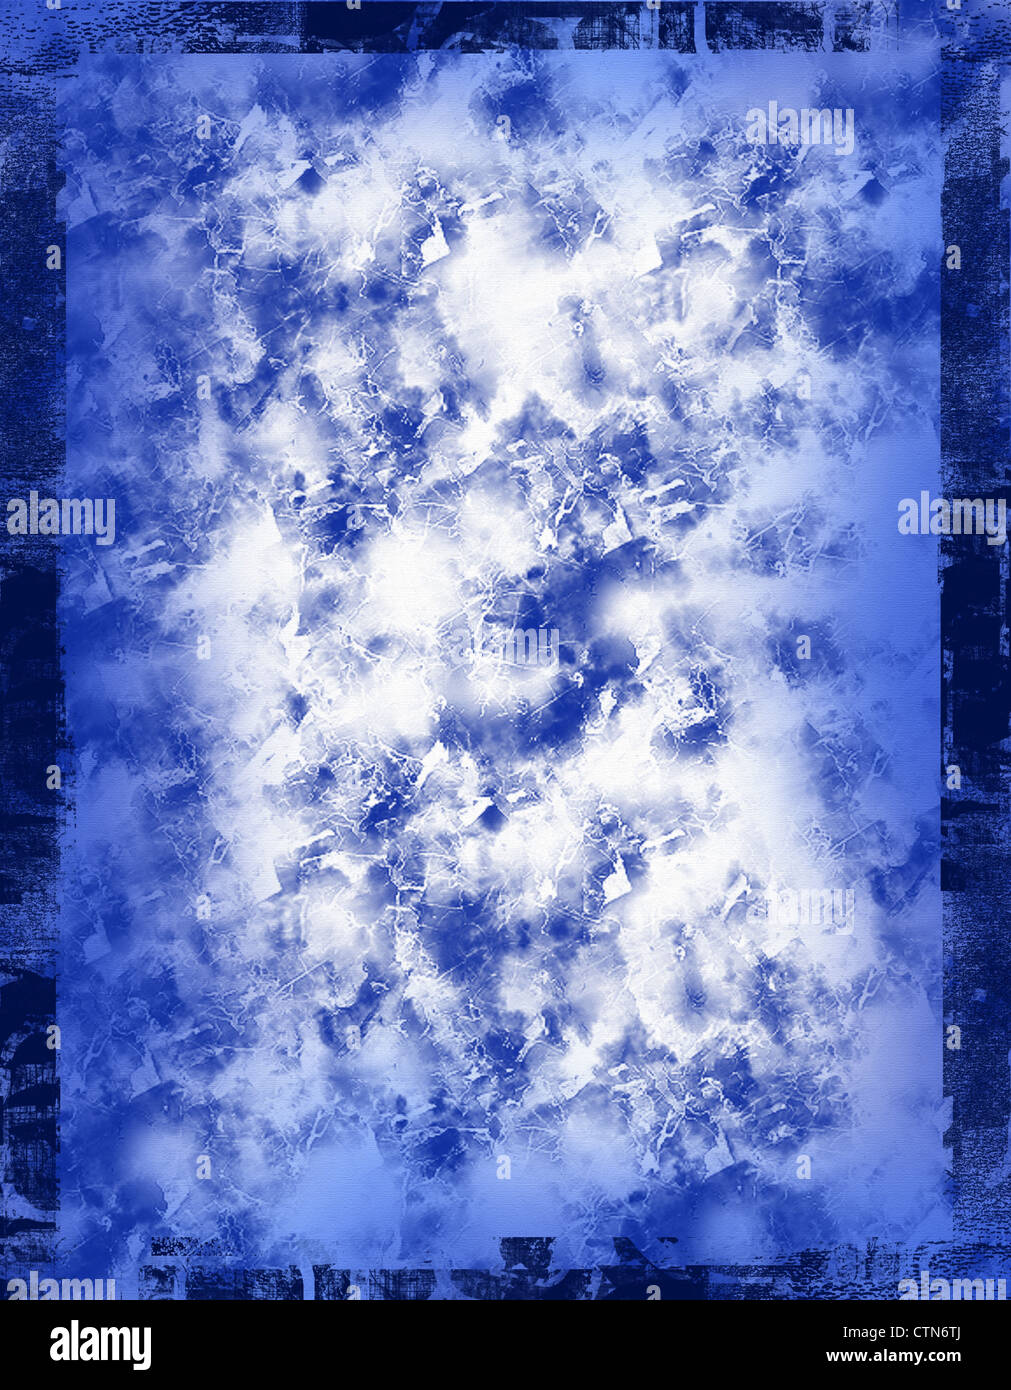 Blue cloudy grunge texture background Stock Photo